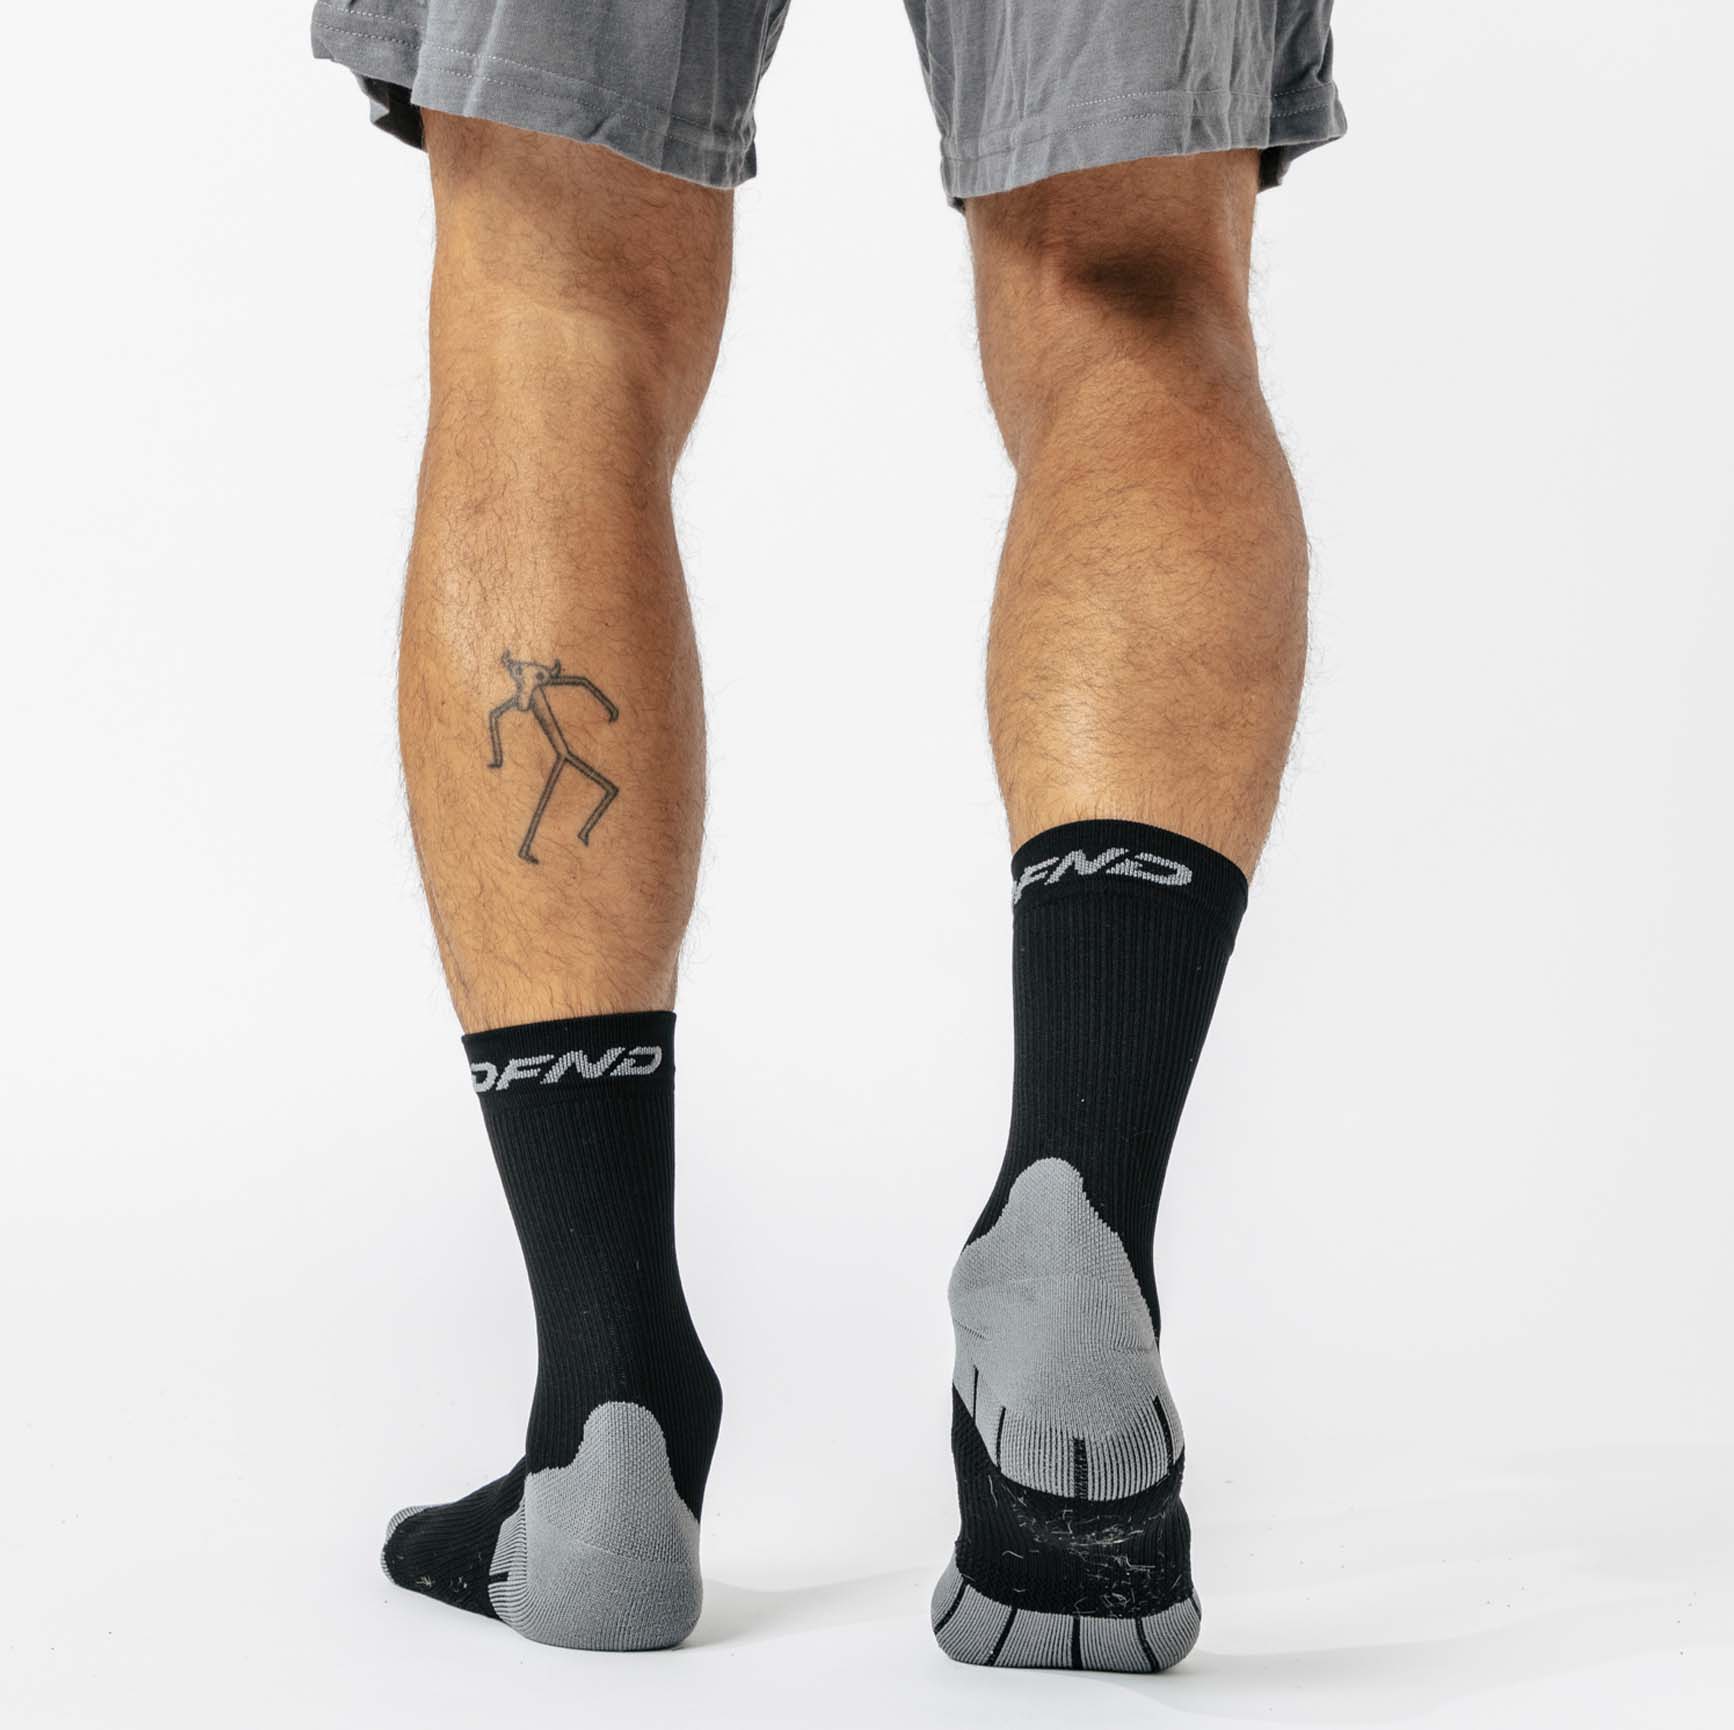 Introducing Compression Socks | Fun Socks with Benefits - Cute But Crazy  Socks